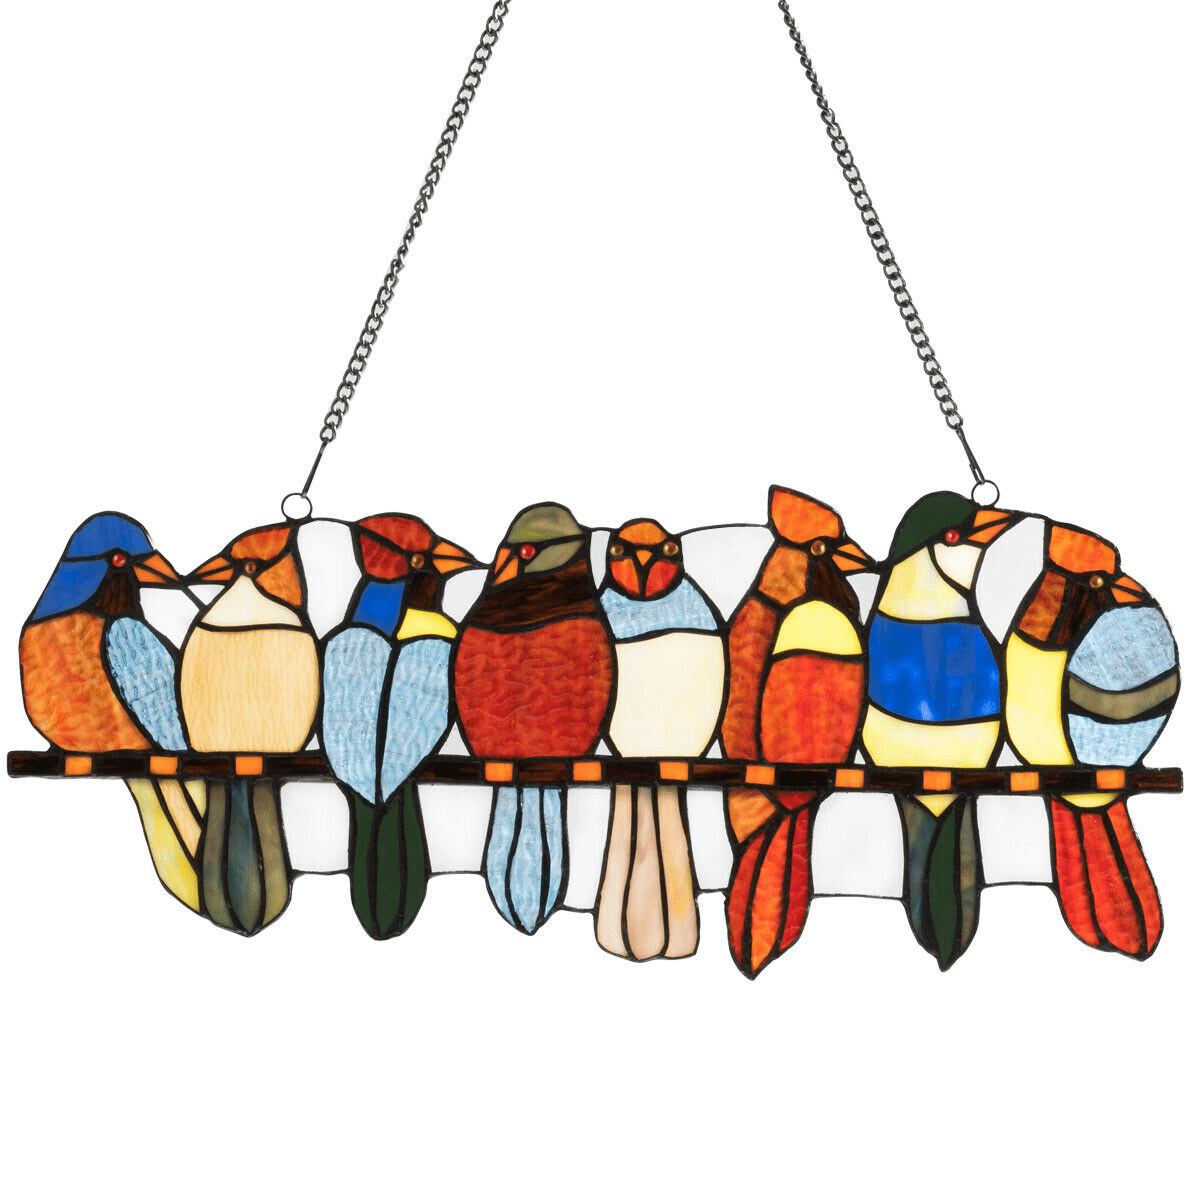 W18 x H25 inches Abstract Art Style 8 Birds in Color Glass Suncacthers for Windows Treatments Capulina Stained Glass Panel Modern Stained Glass Window Hangings with Chain